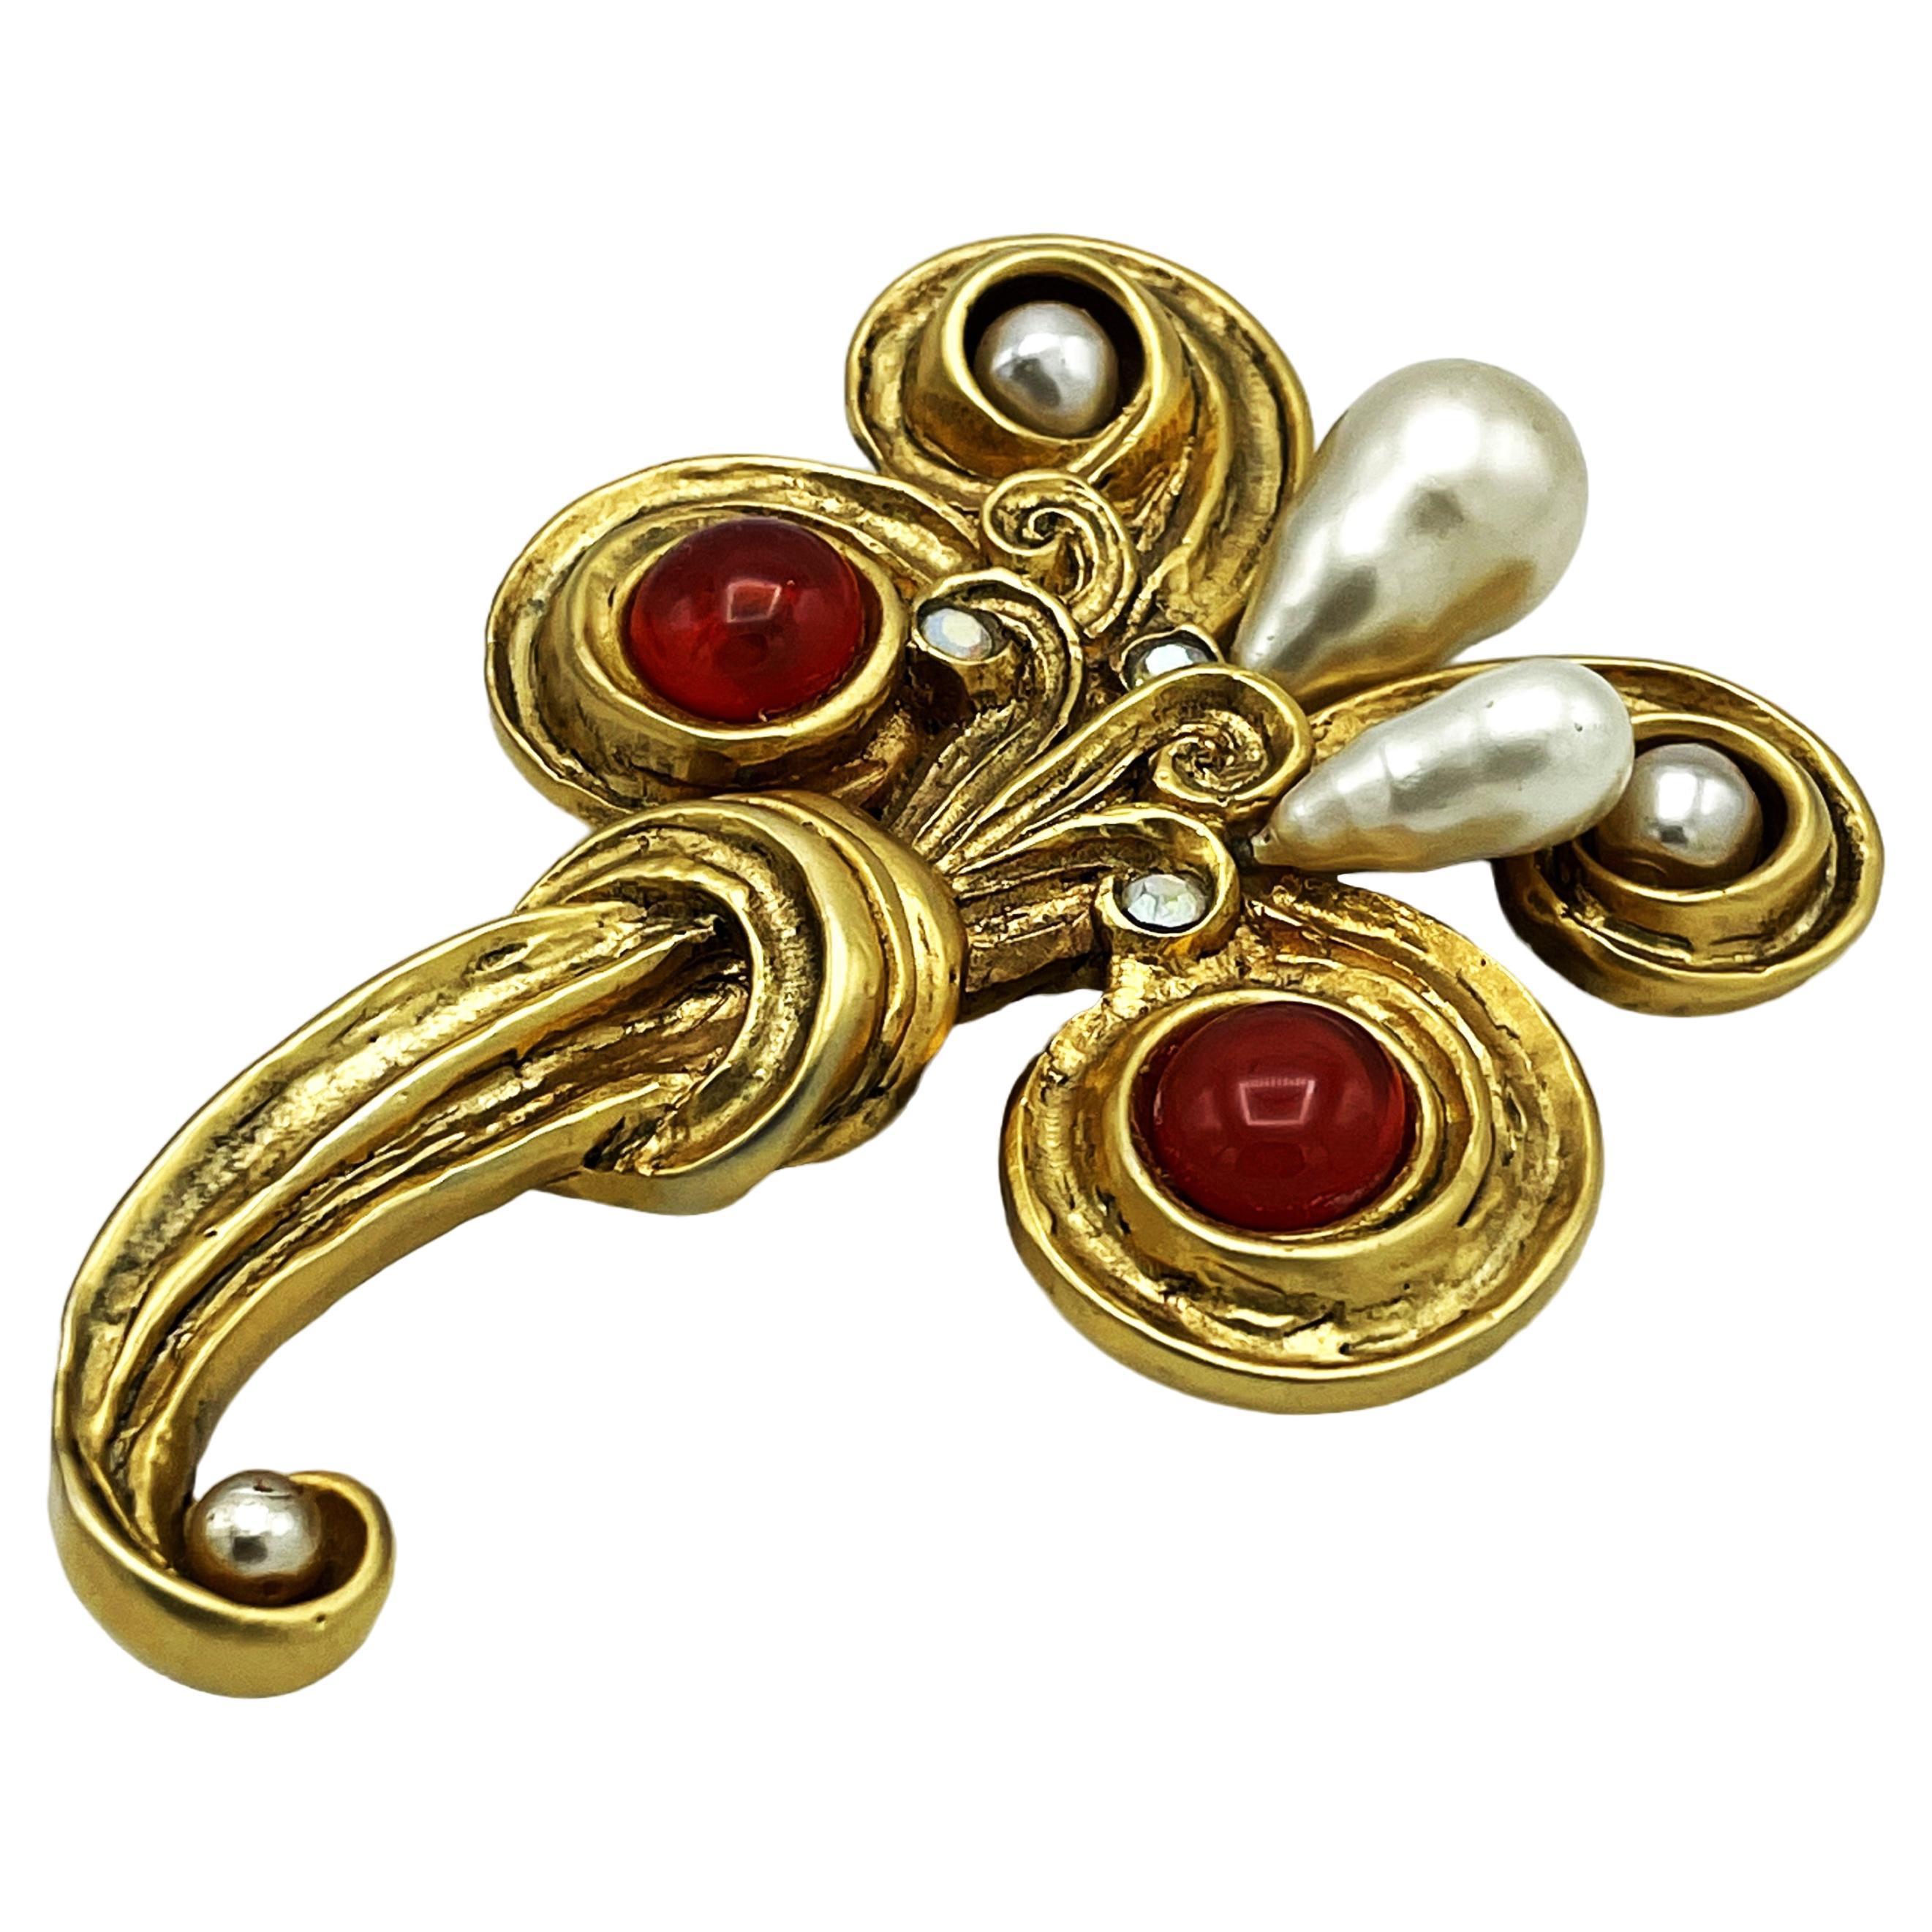 A decorativ Brooch by CLAIR DEVÈ PARIS, fake pearls made from resin in the 1980s.

Measurement
Height 10 cm
Width 8cm
Depth 1.5cm
Features
- Signed on the backside CLAIRE DEVE PARIS
- 2 red resin 1, 3 cm 
- 2 larg nice faux Perls, teardrop shape 2,3